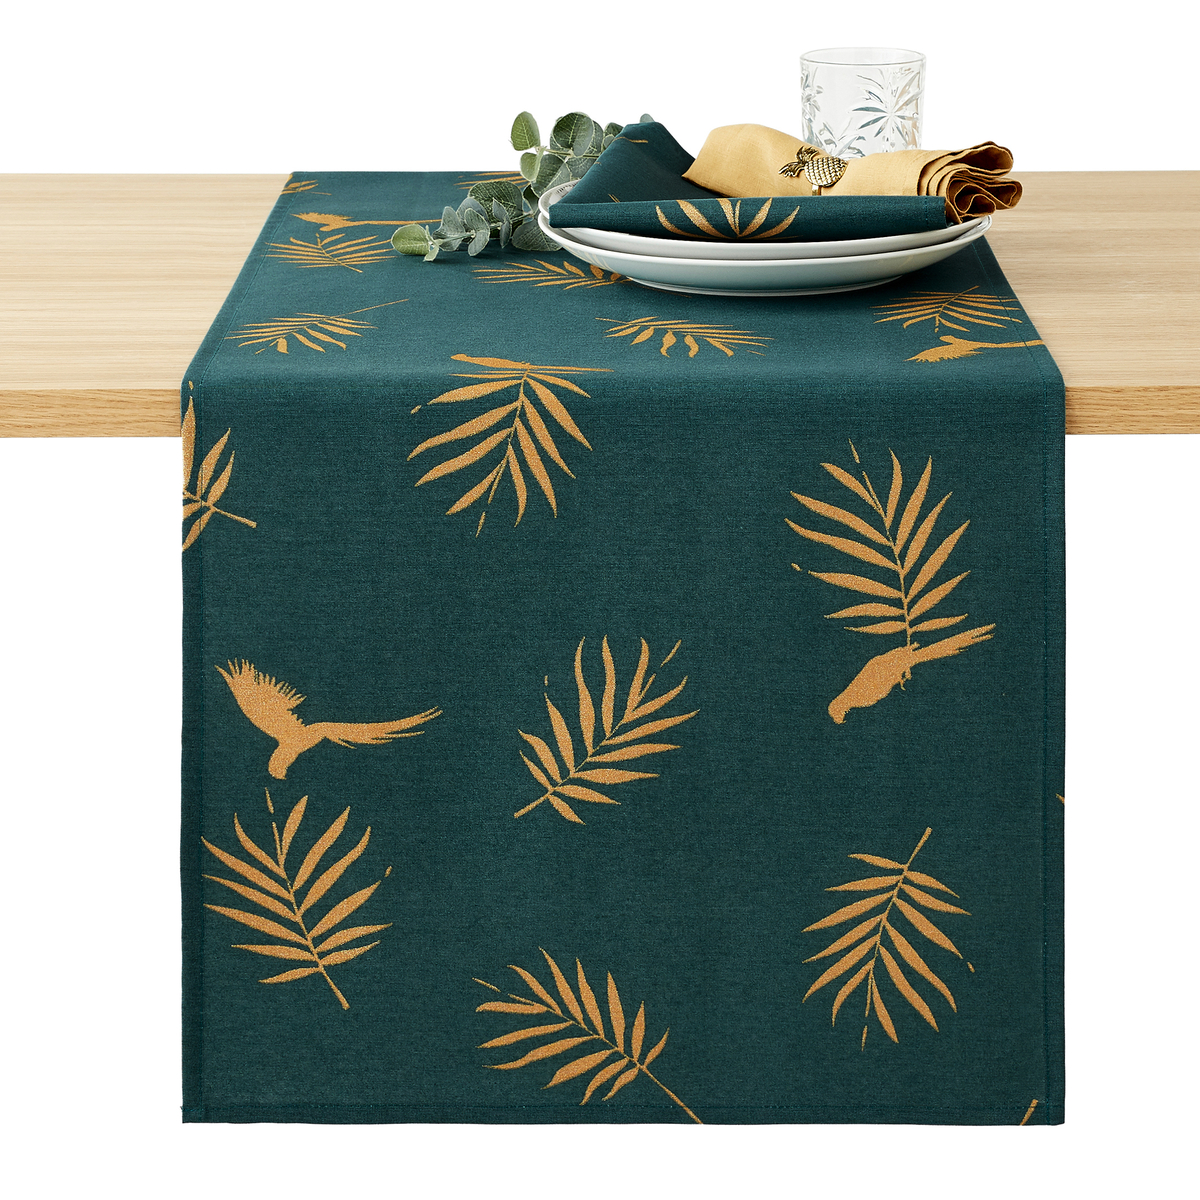 Cancun Anti-Stain Table Runner